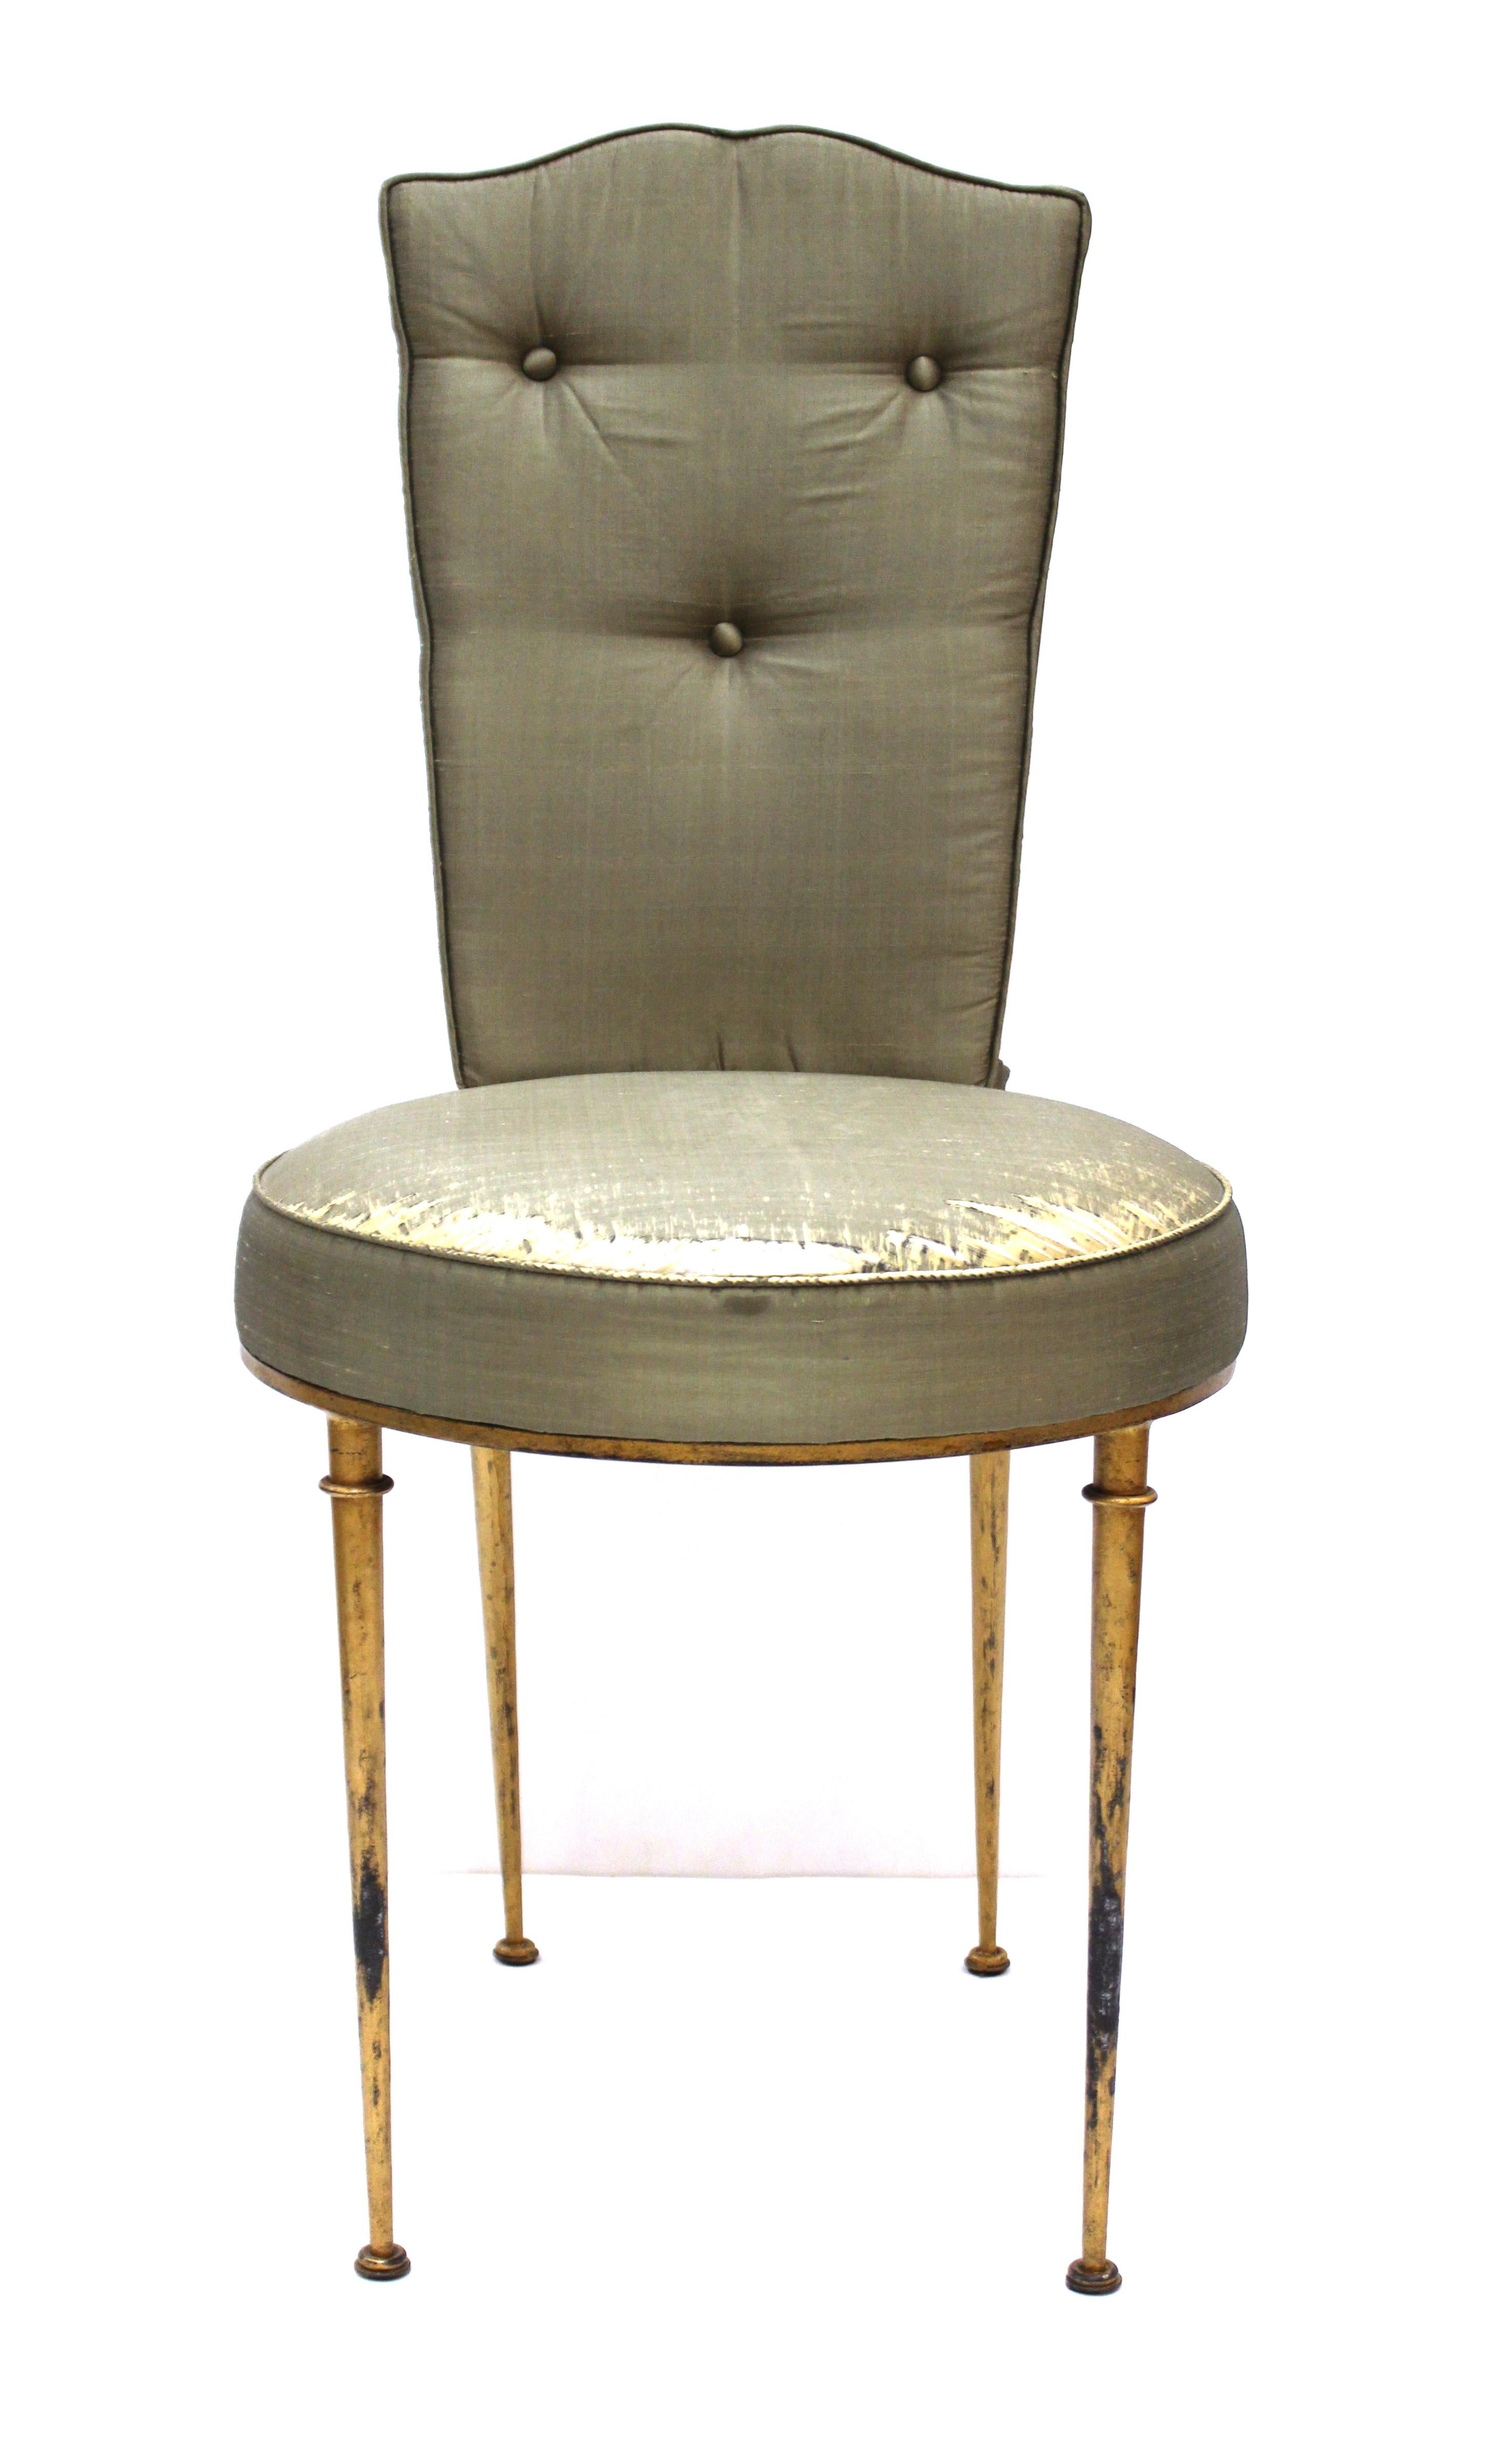 French Mid-Century Modern side chair or vanity chair in gilt metal, designed by Rene Prou. The piece was made during the mid-20th century and comes with the original upholstery. In great vintage condition with age-appropriate wear and use to the